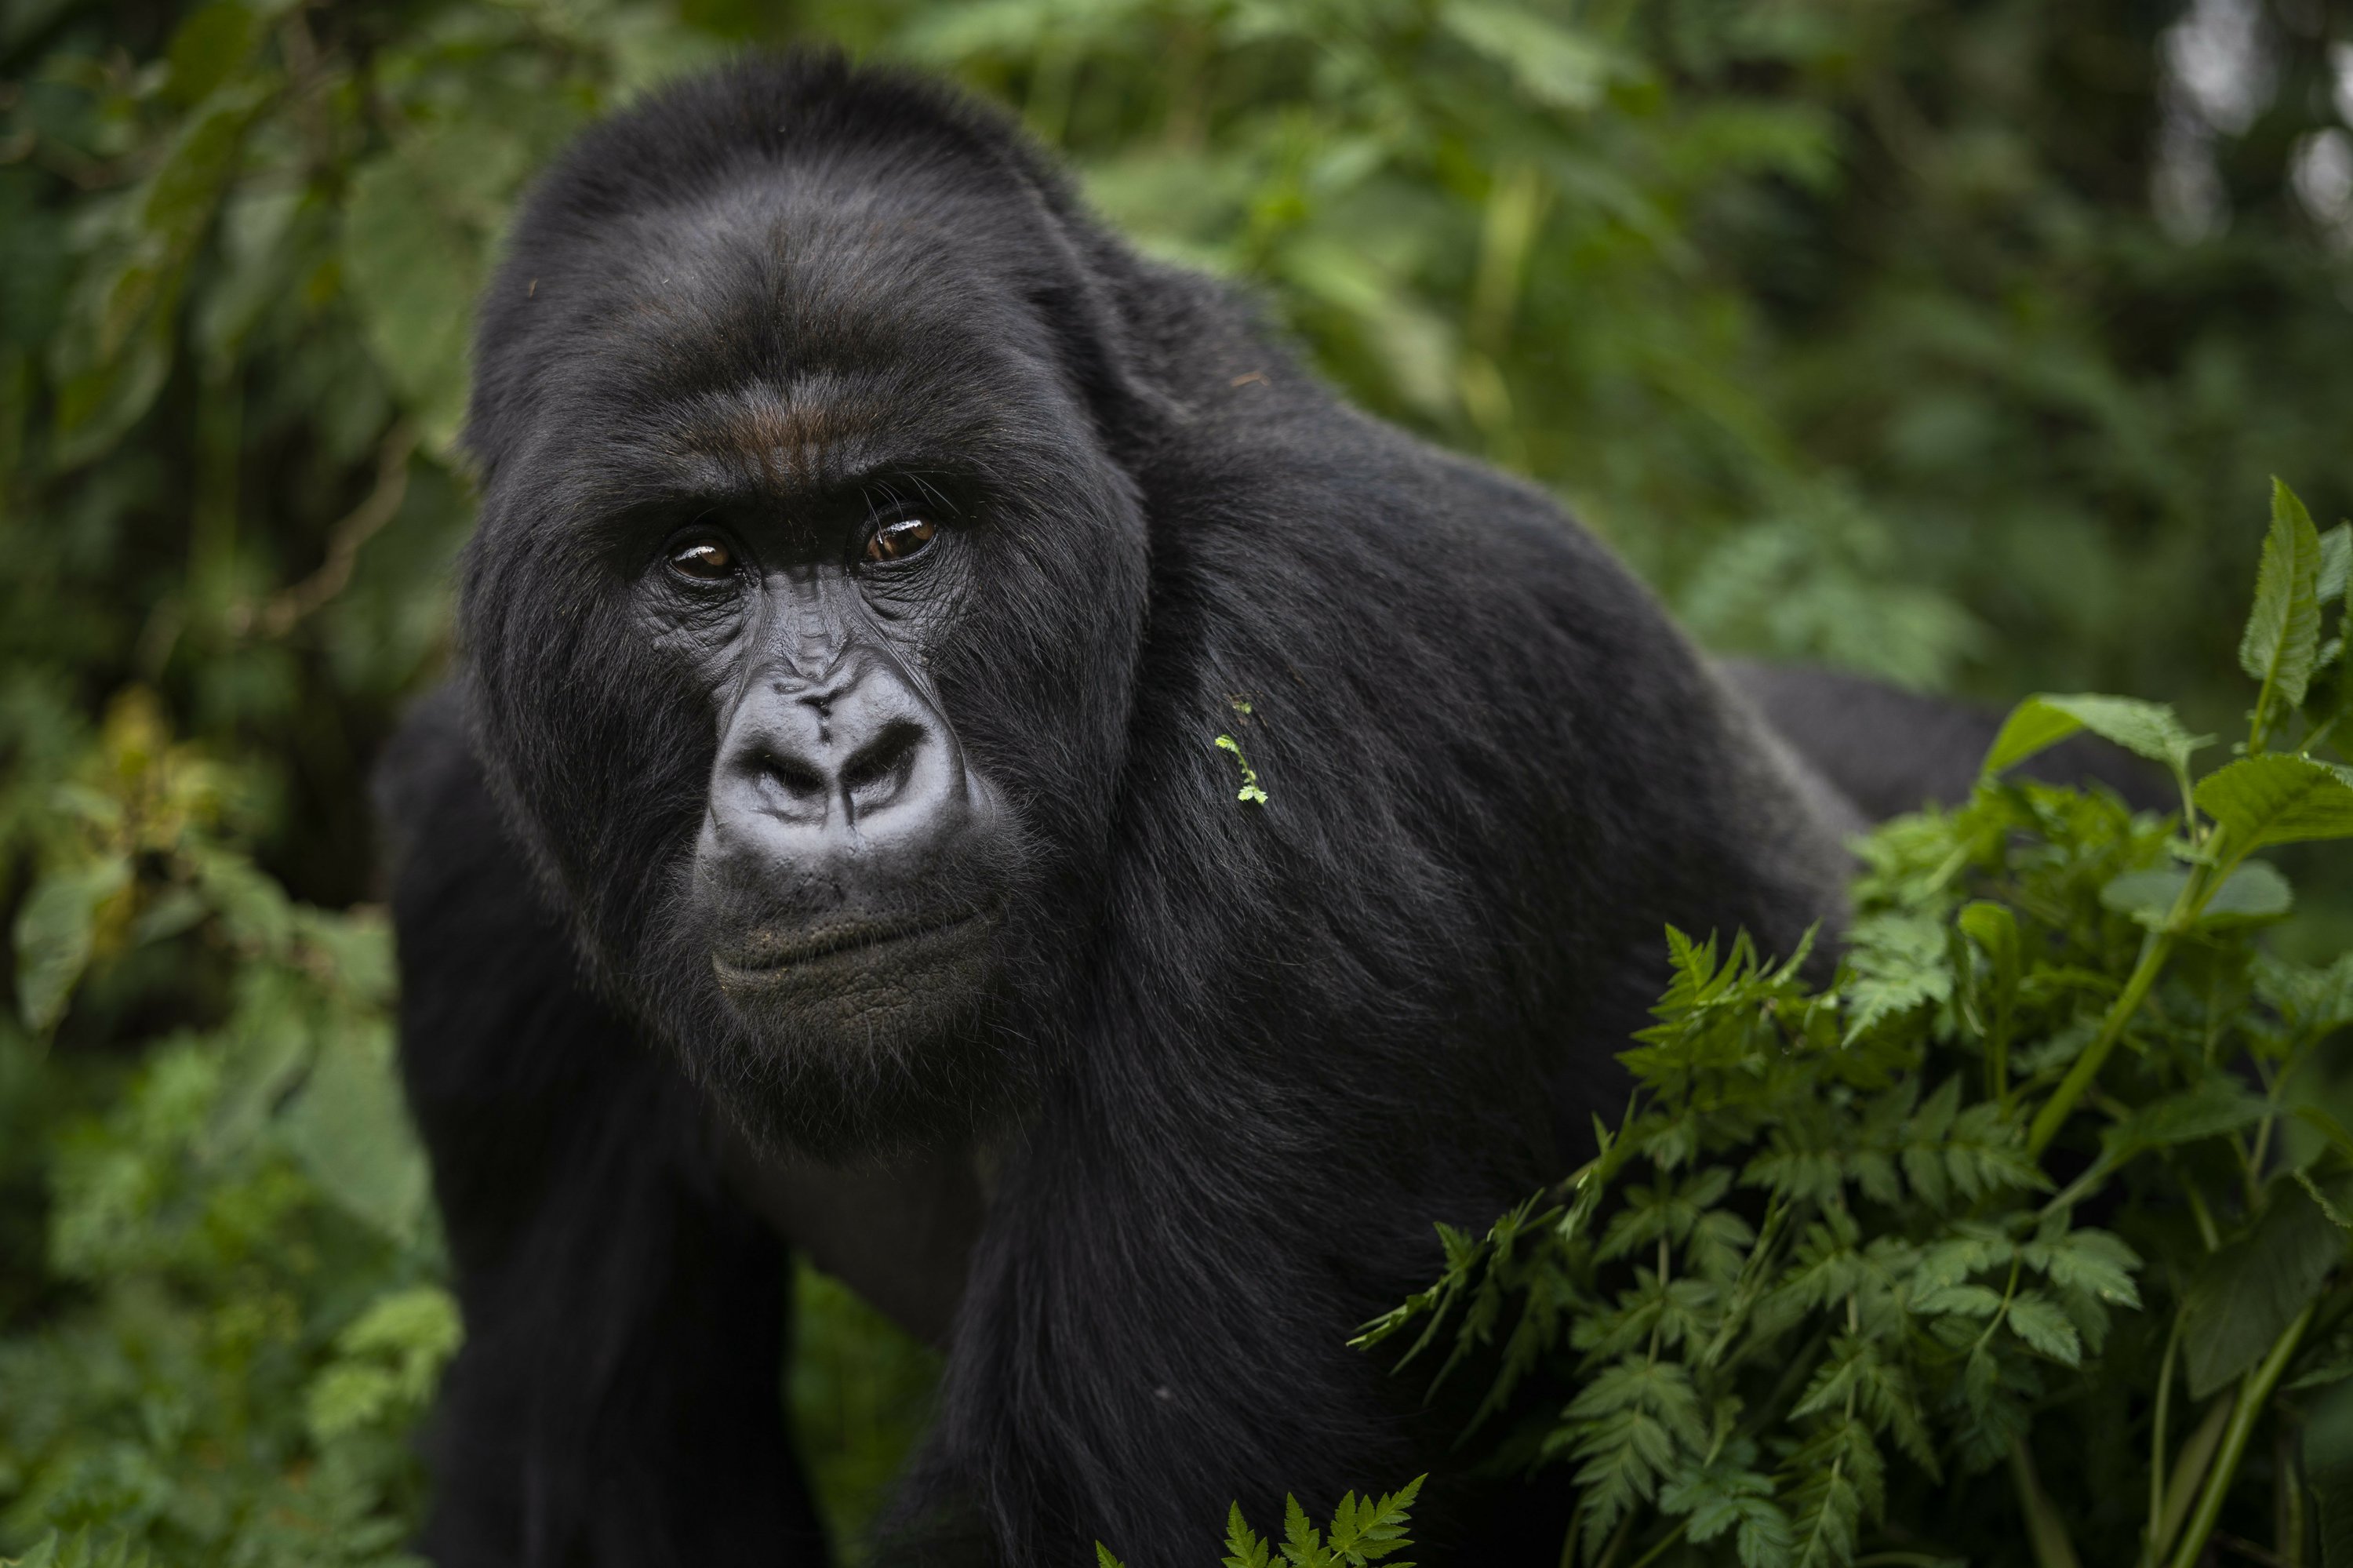 A crowded mountain can make silverback gorillas more violent